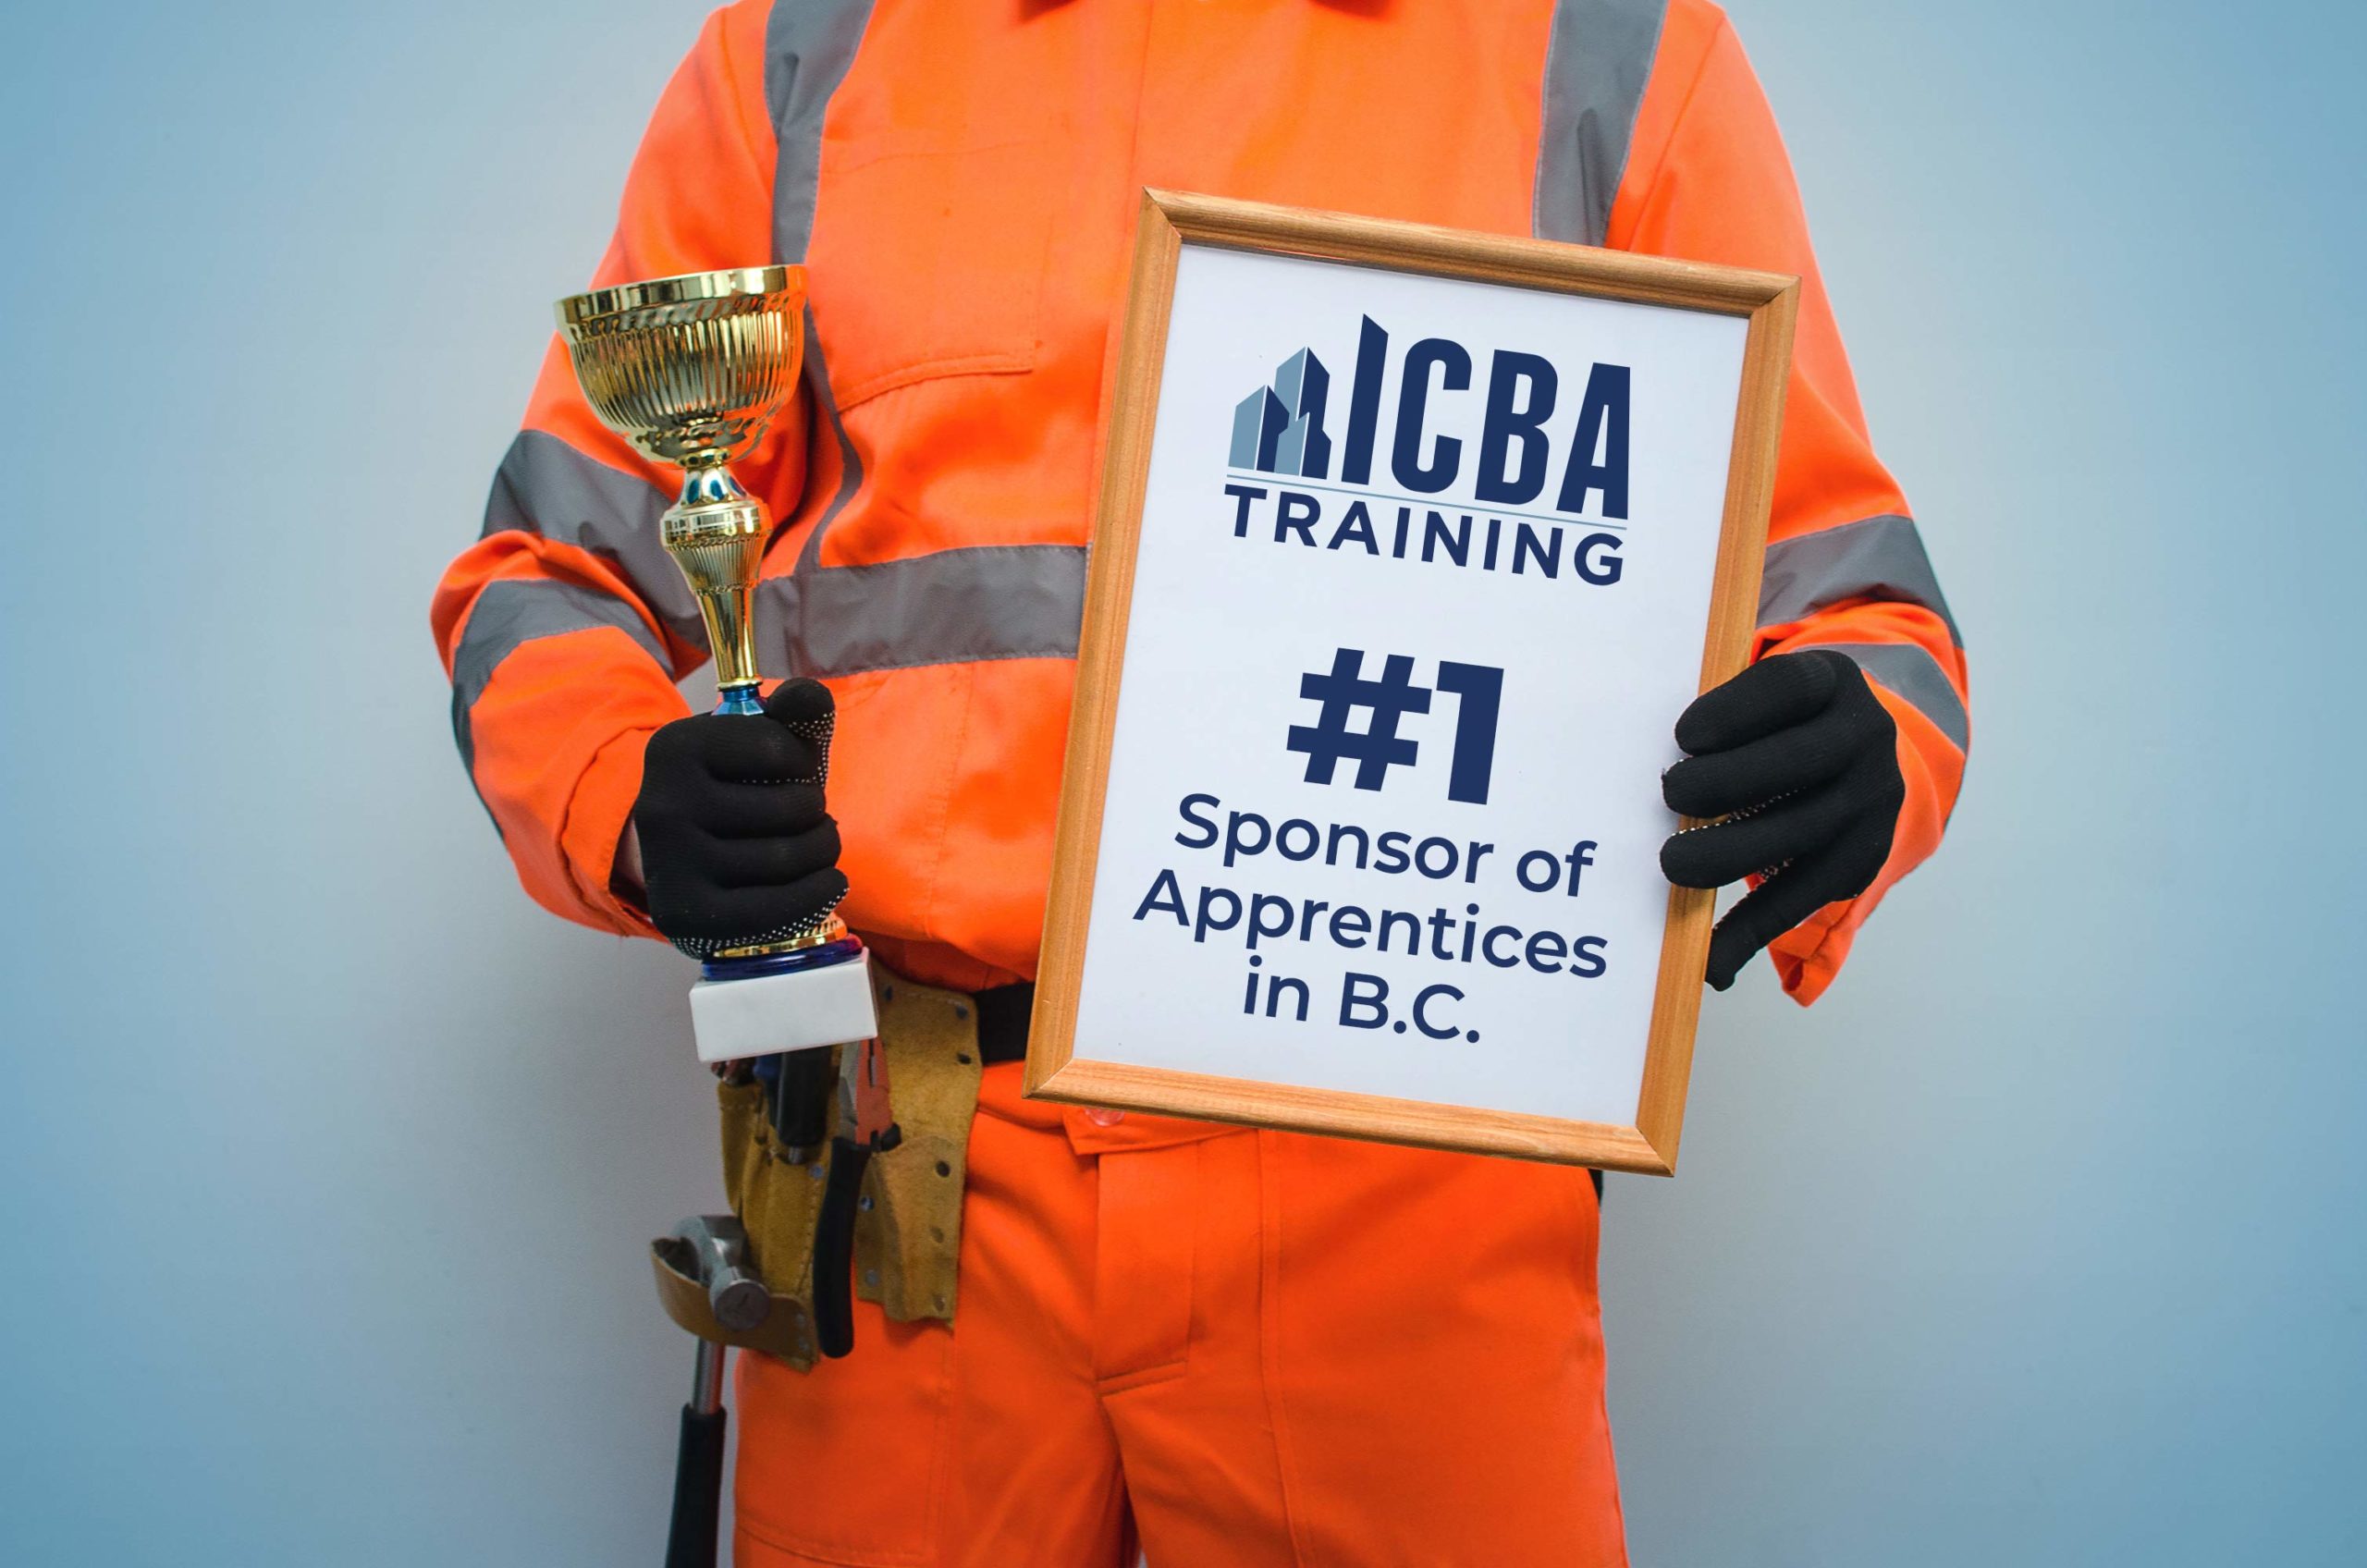 NEWS: ICBA Extends Lead as BC’s #1 Sponsor of Apprentices